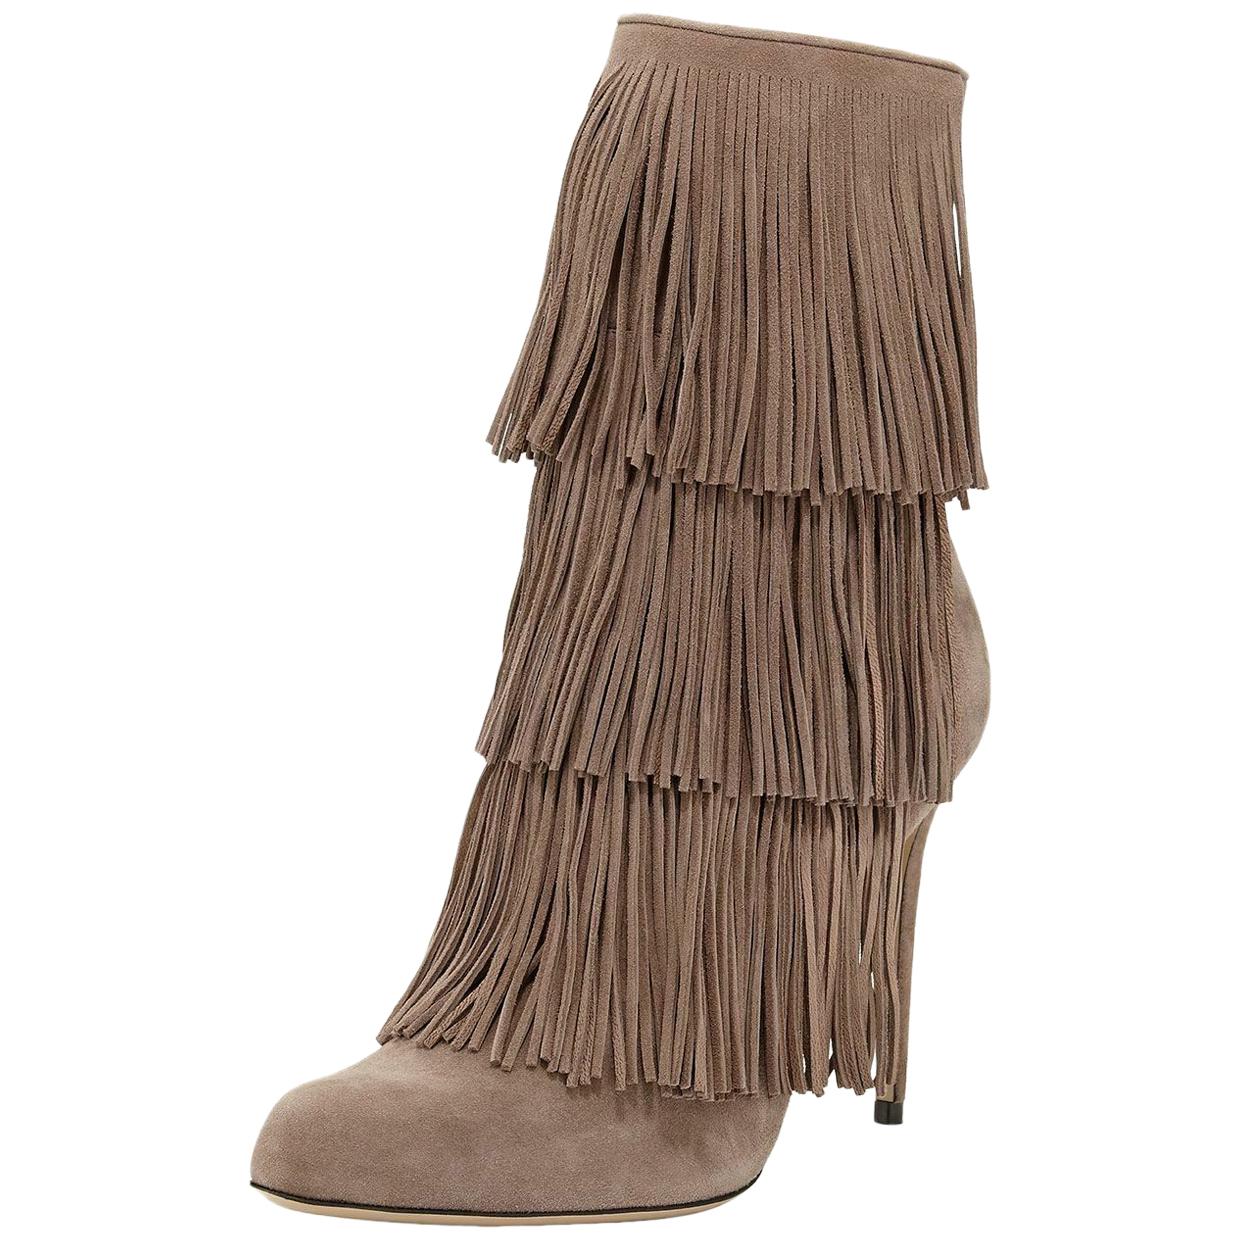 Paul Andrew Taos Fringed Suede Ankle Boots 